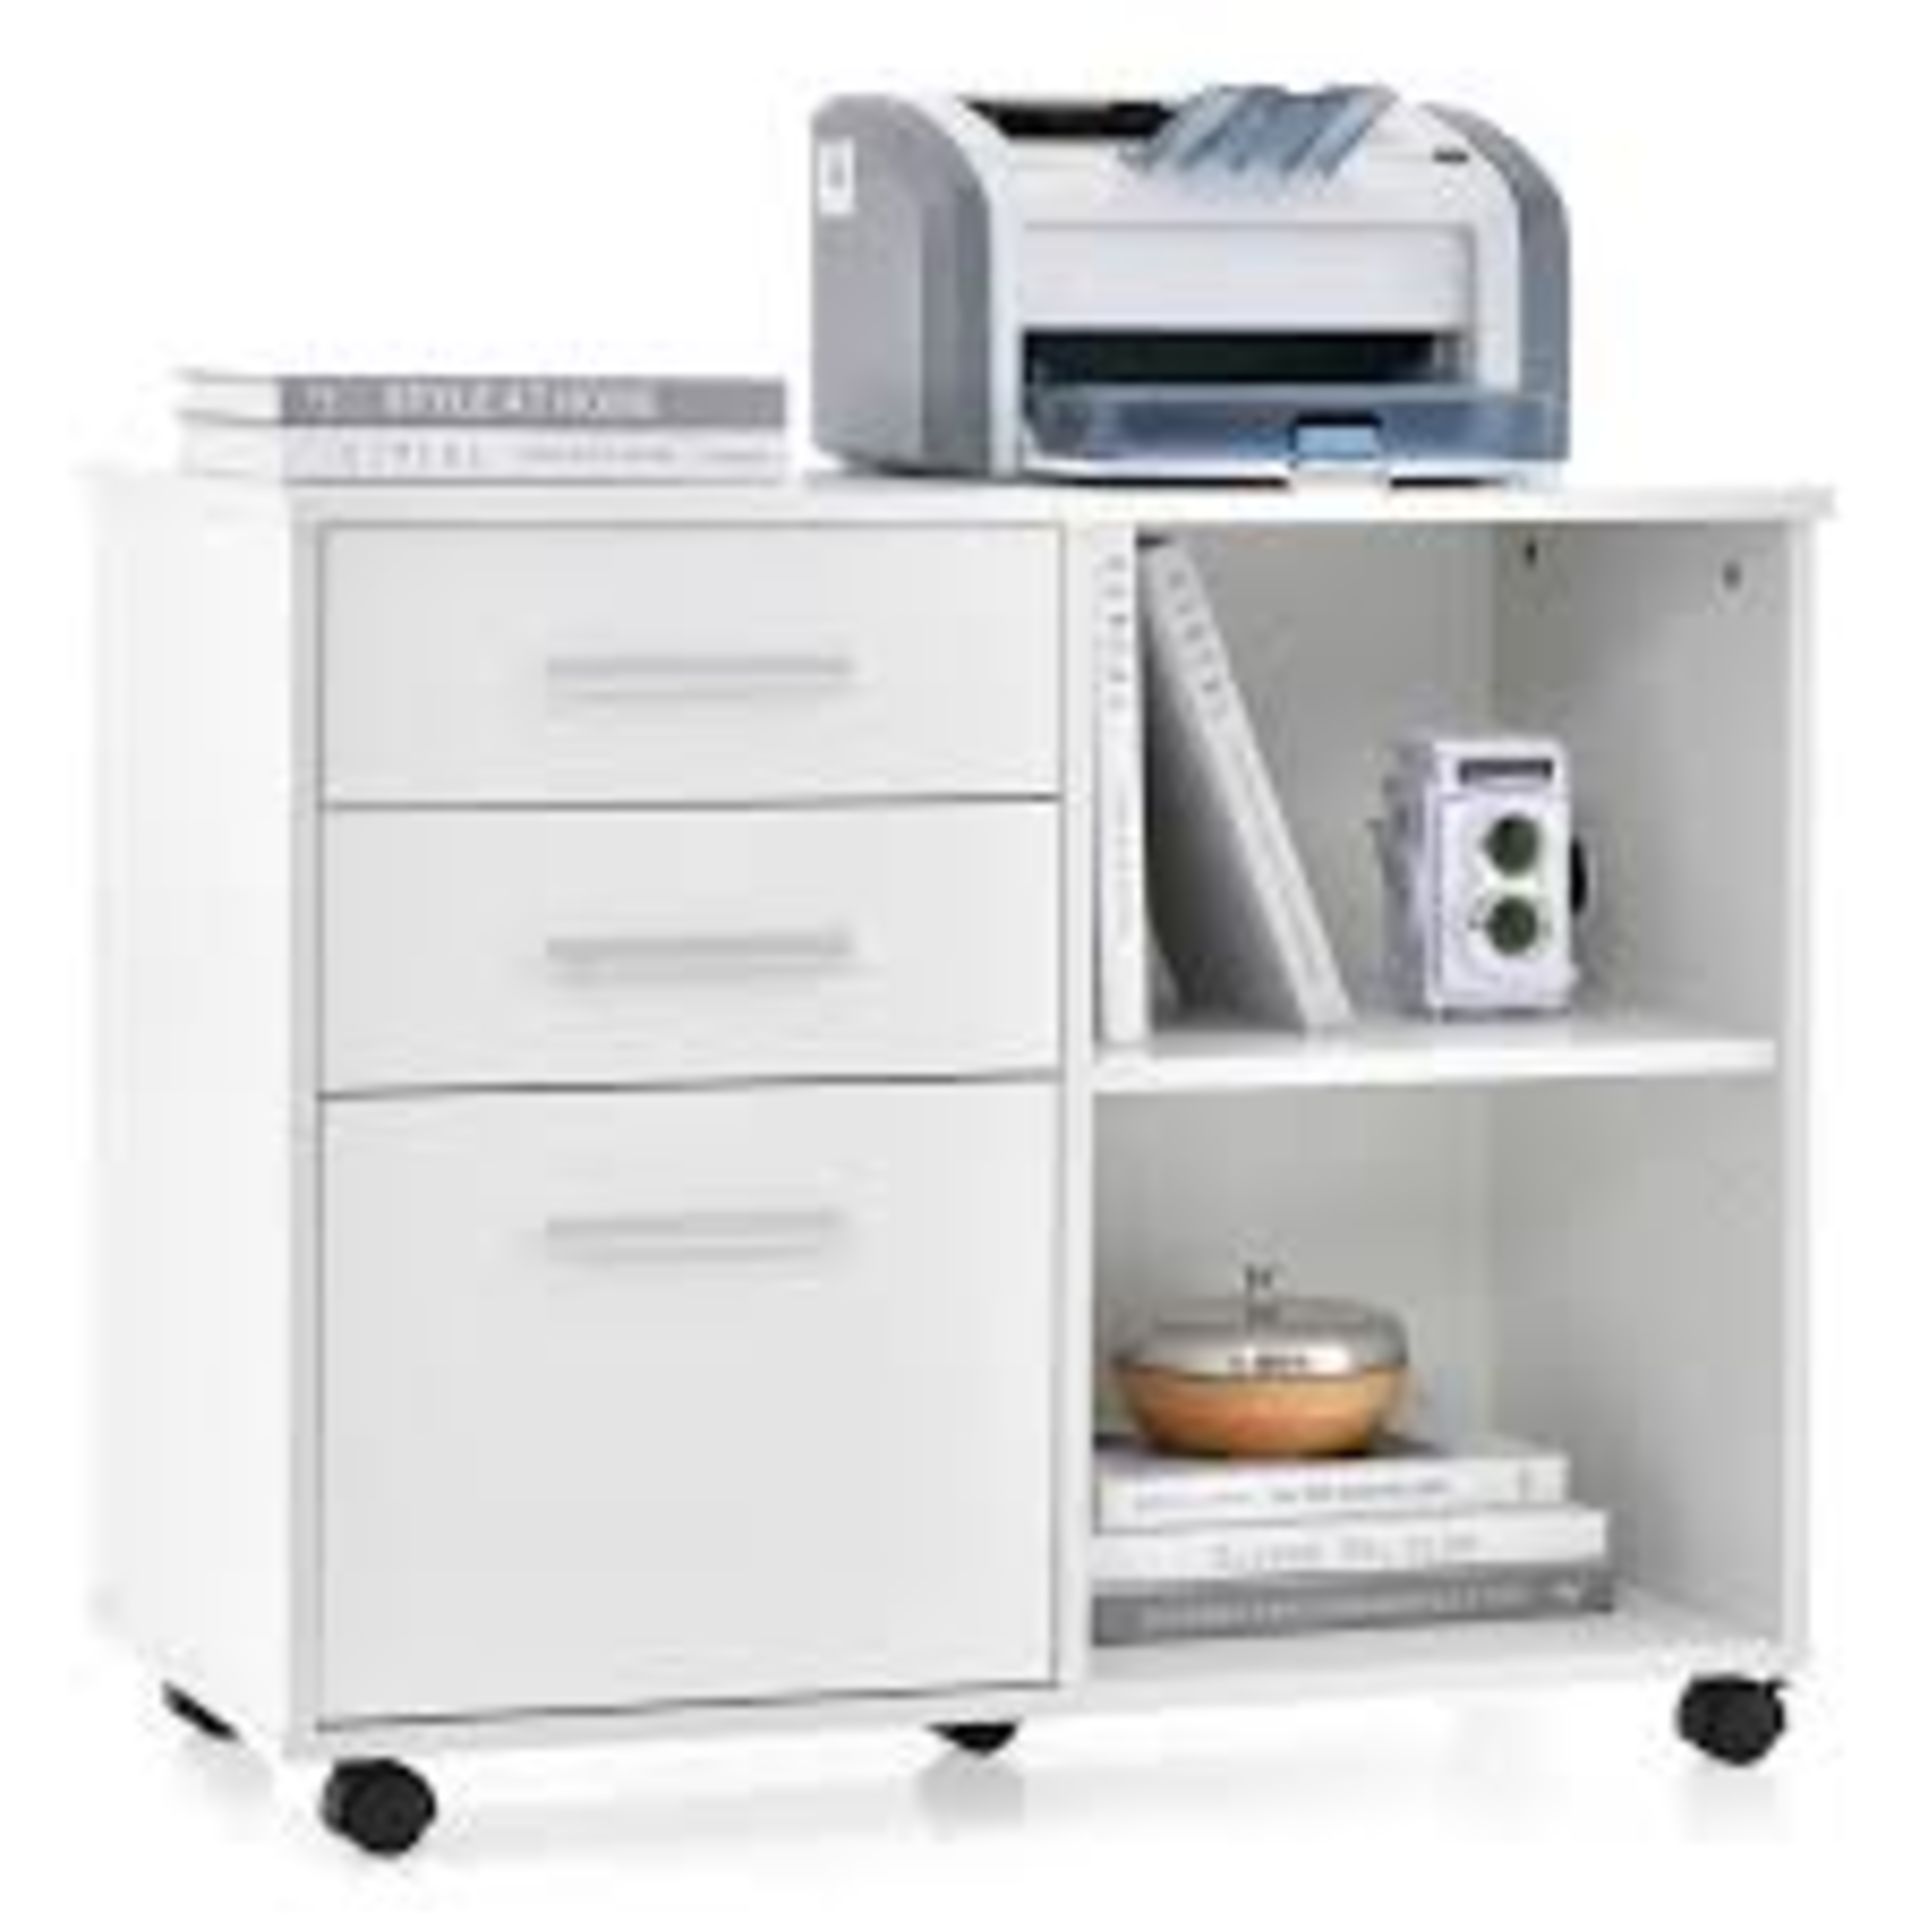 3-Drawer Mobile Lateral File Cabinet Printer Stand. - R14.8. Made of high-quality material to ensure